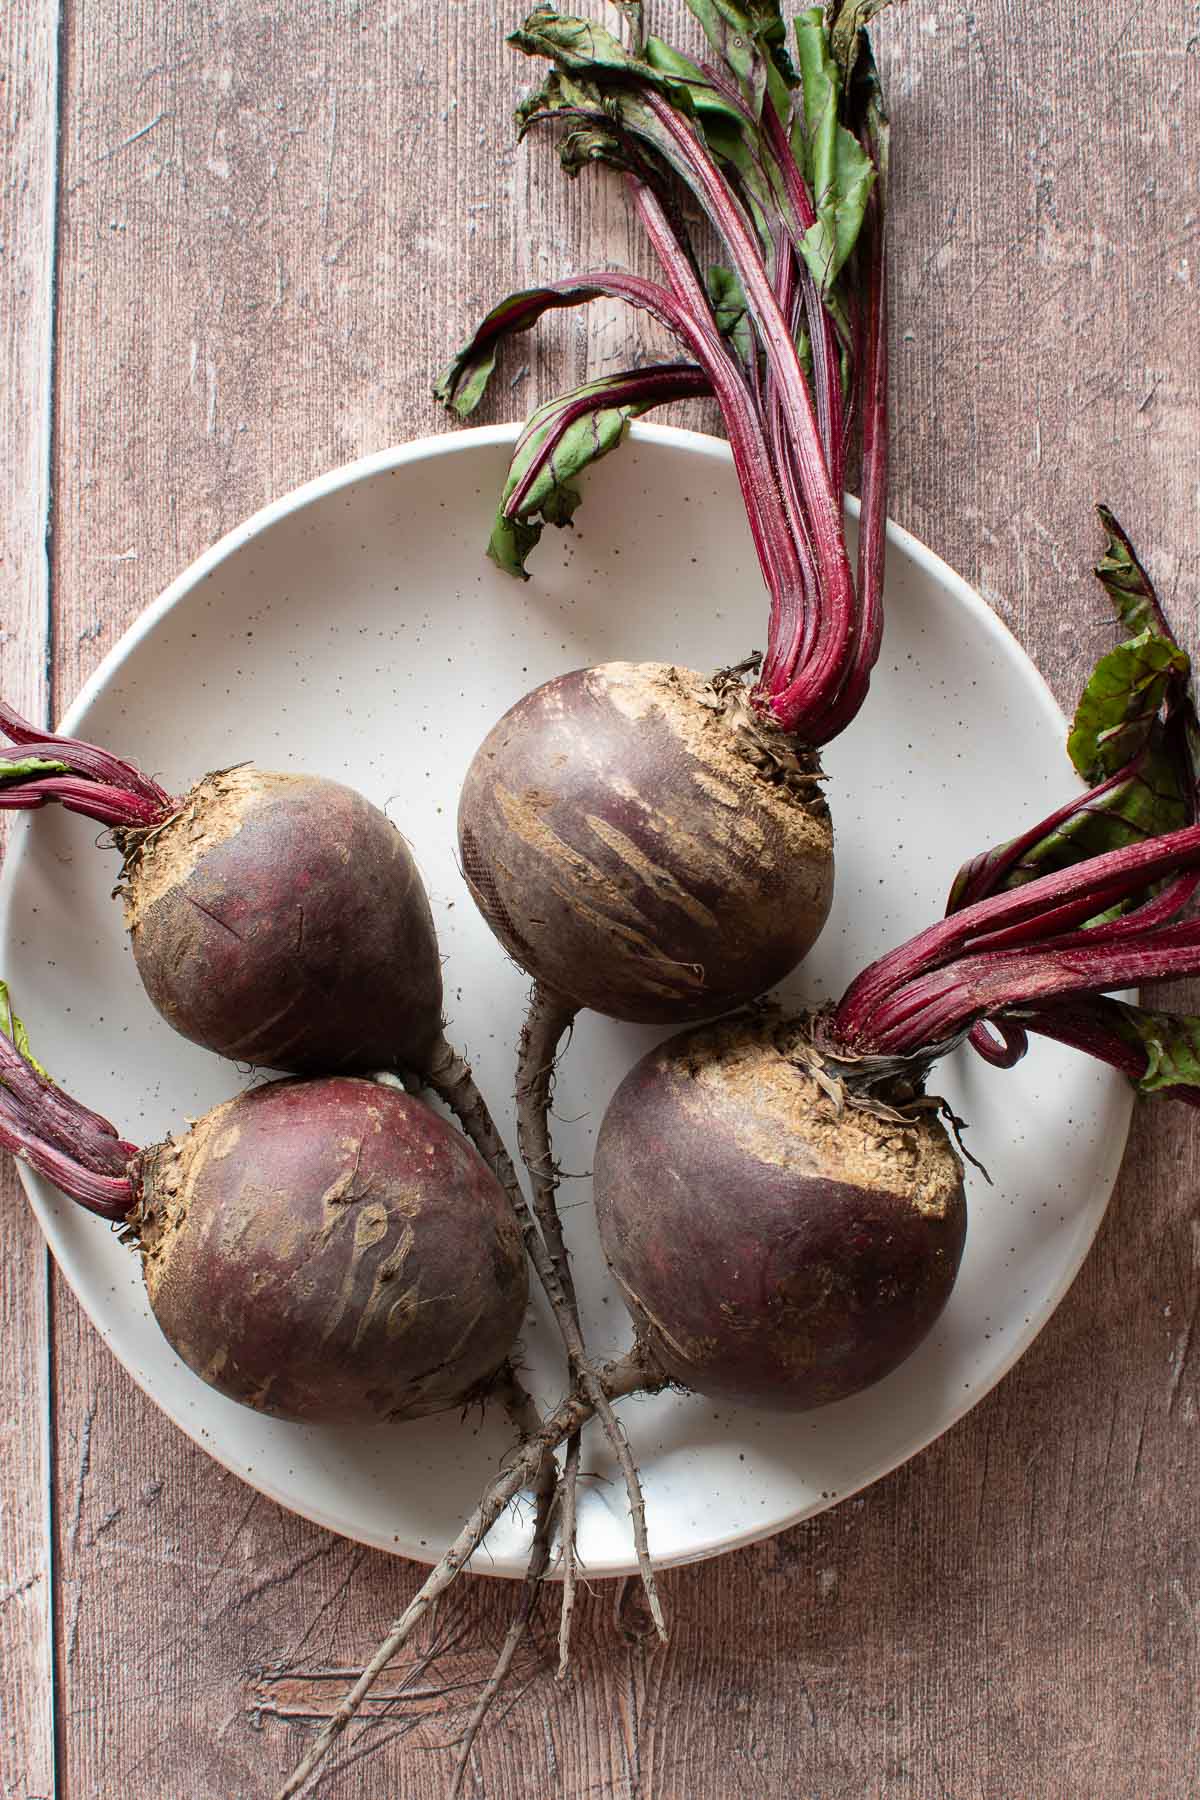 Whole beetroot on a plate.